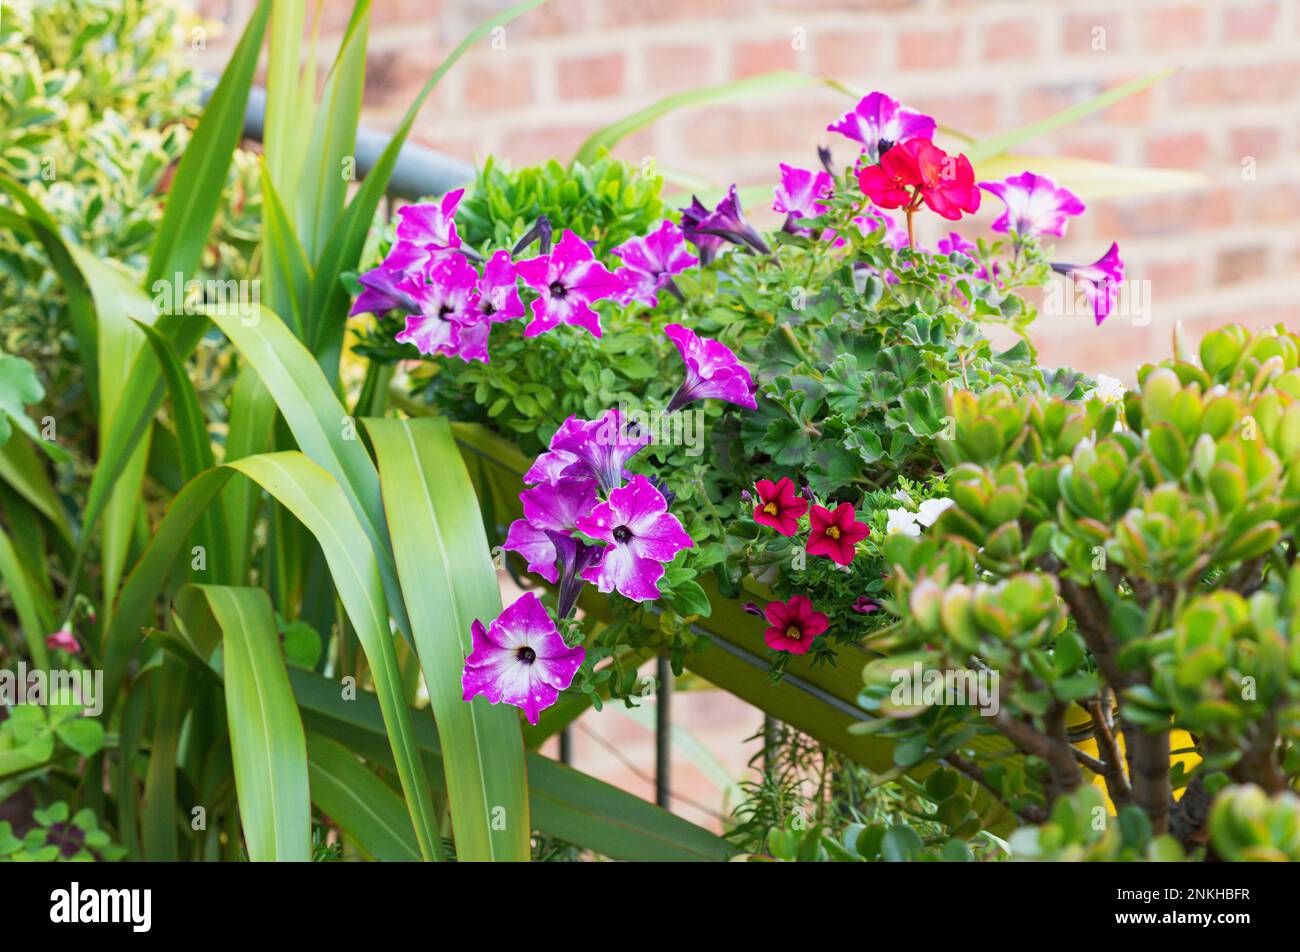 Pink petunias cultivated in balcony garden Stock Photo